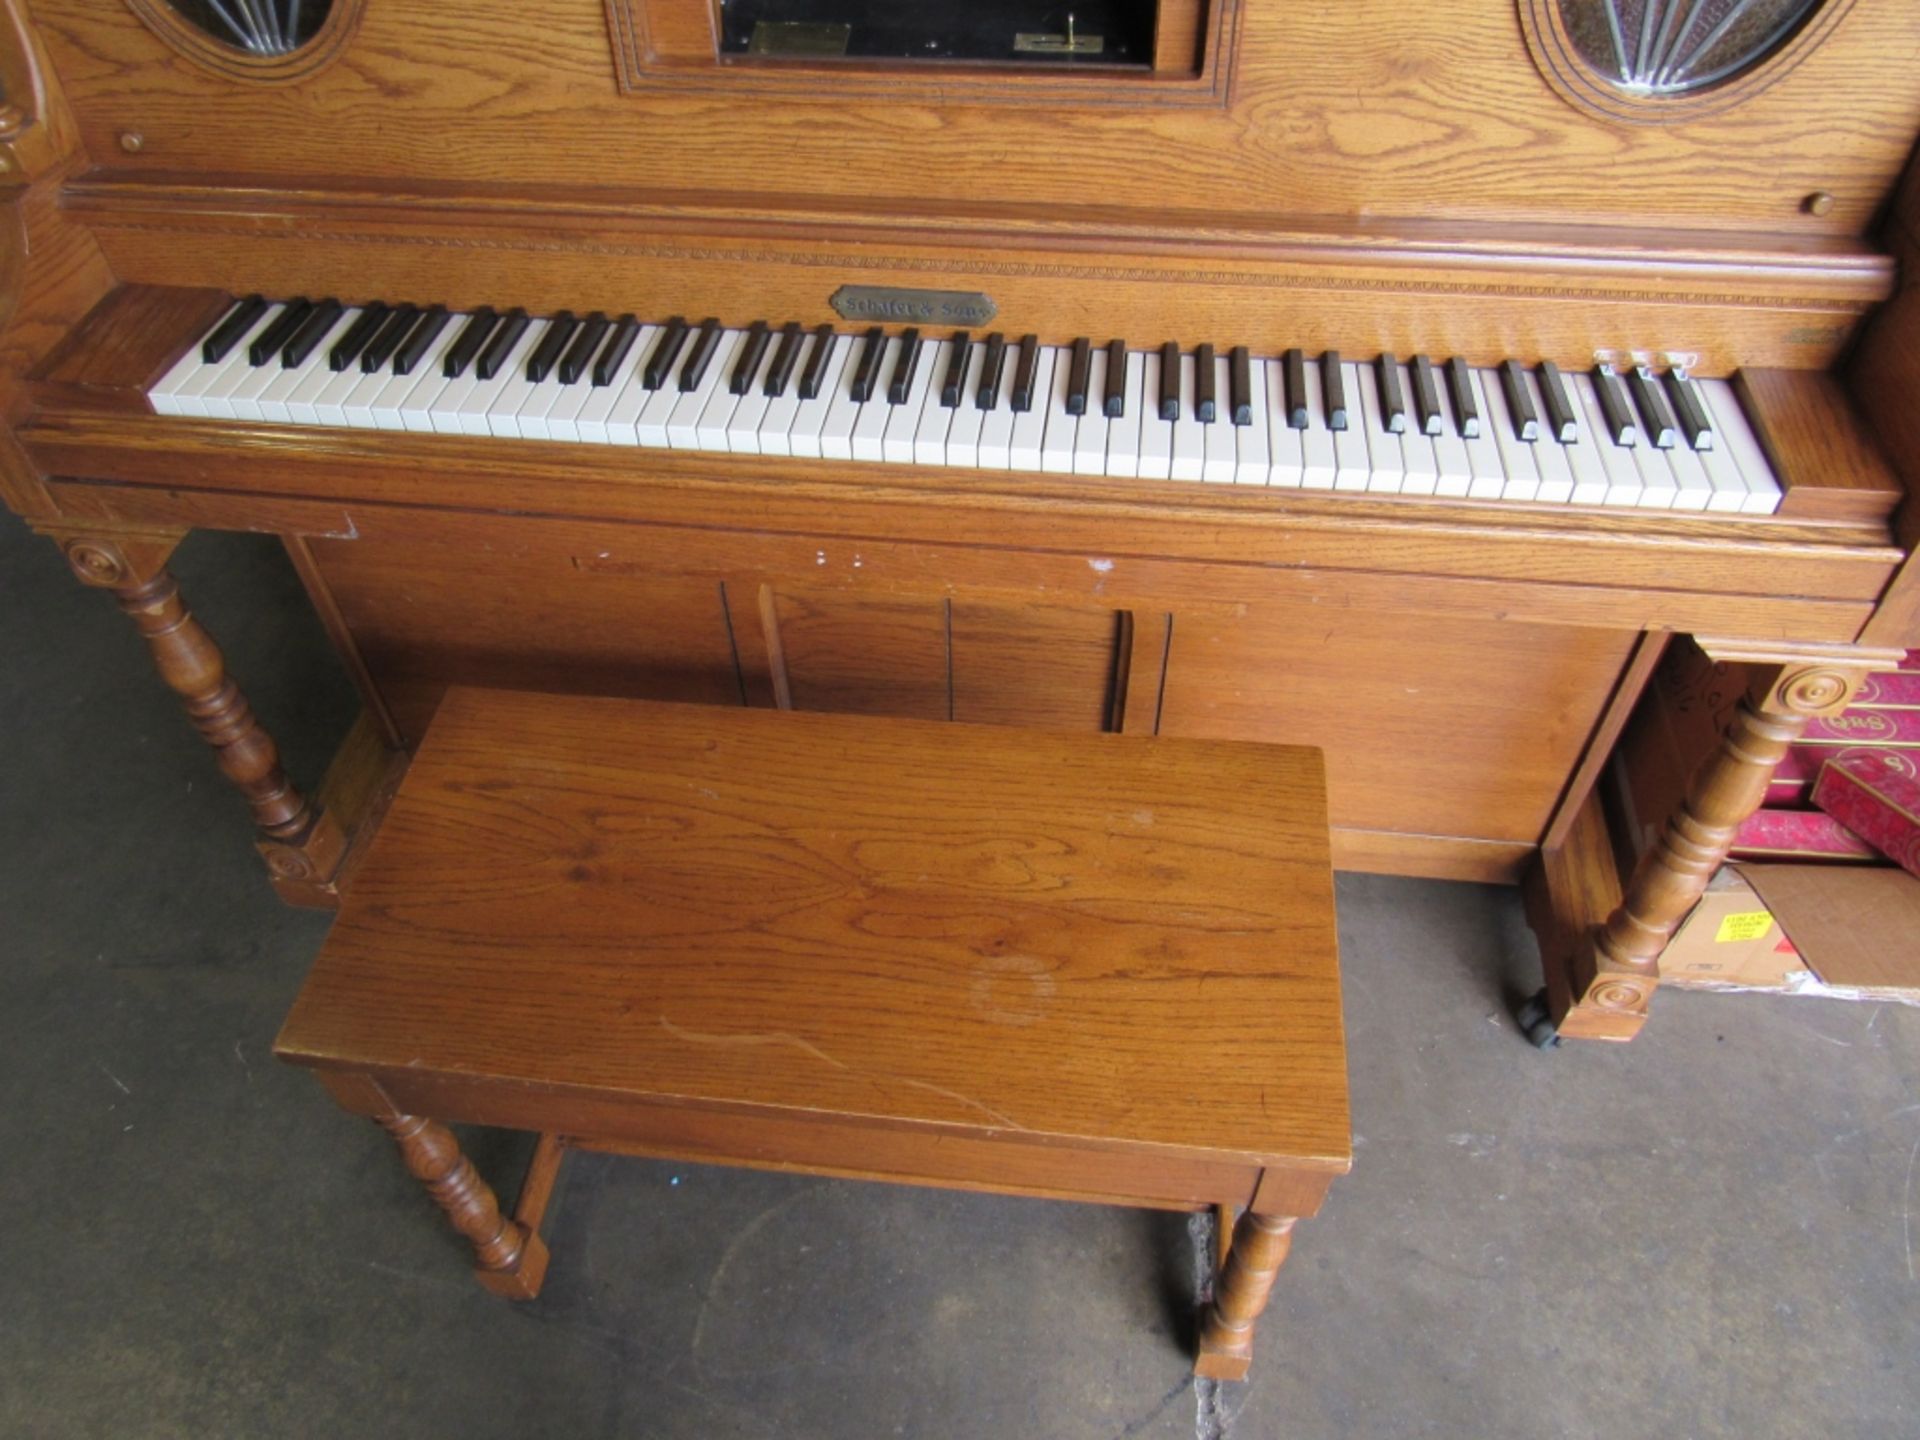 SCHAFER & SONS PLAYER PIANO W/ MUSIC L@@K!!! - Image 7 of 10